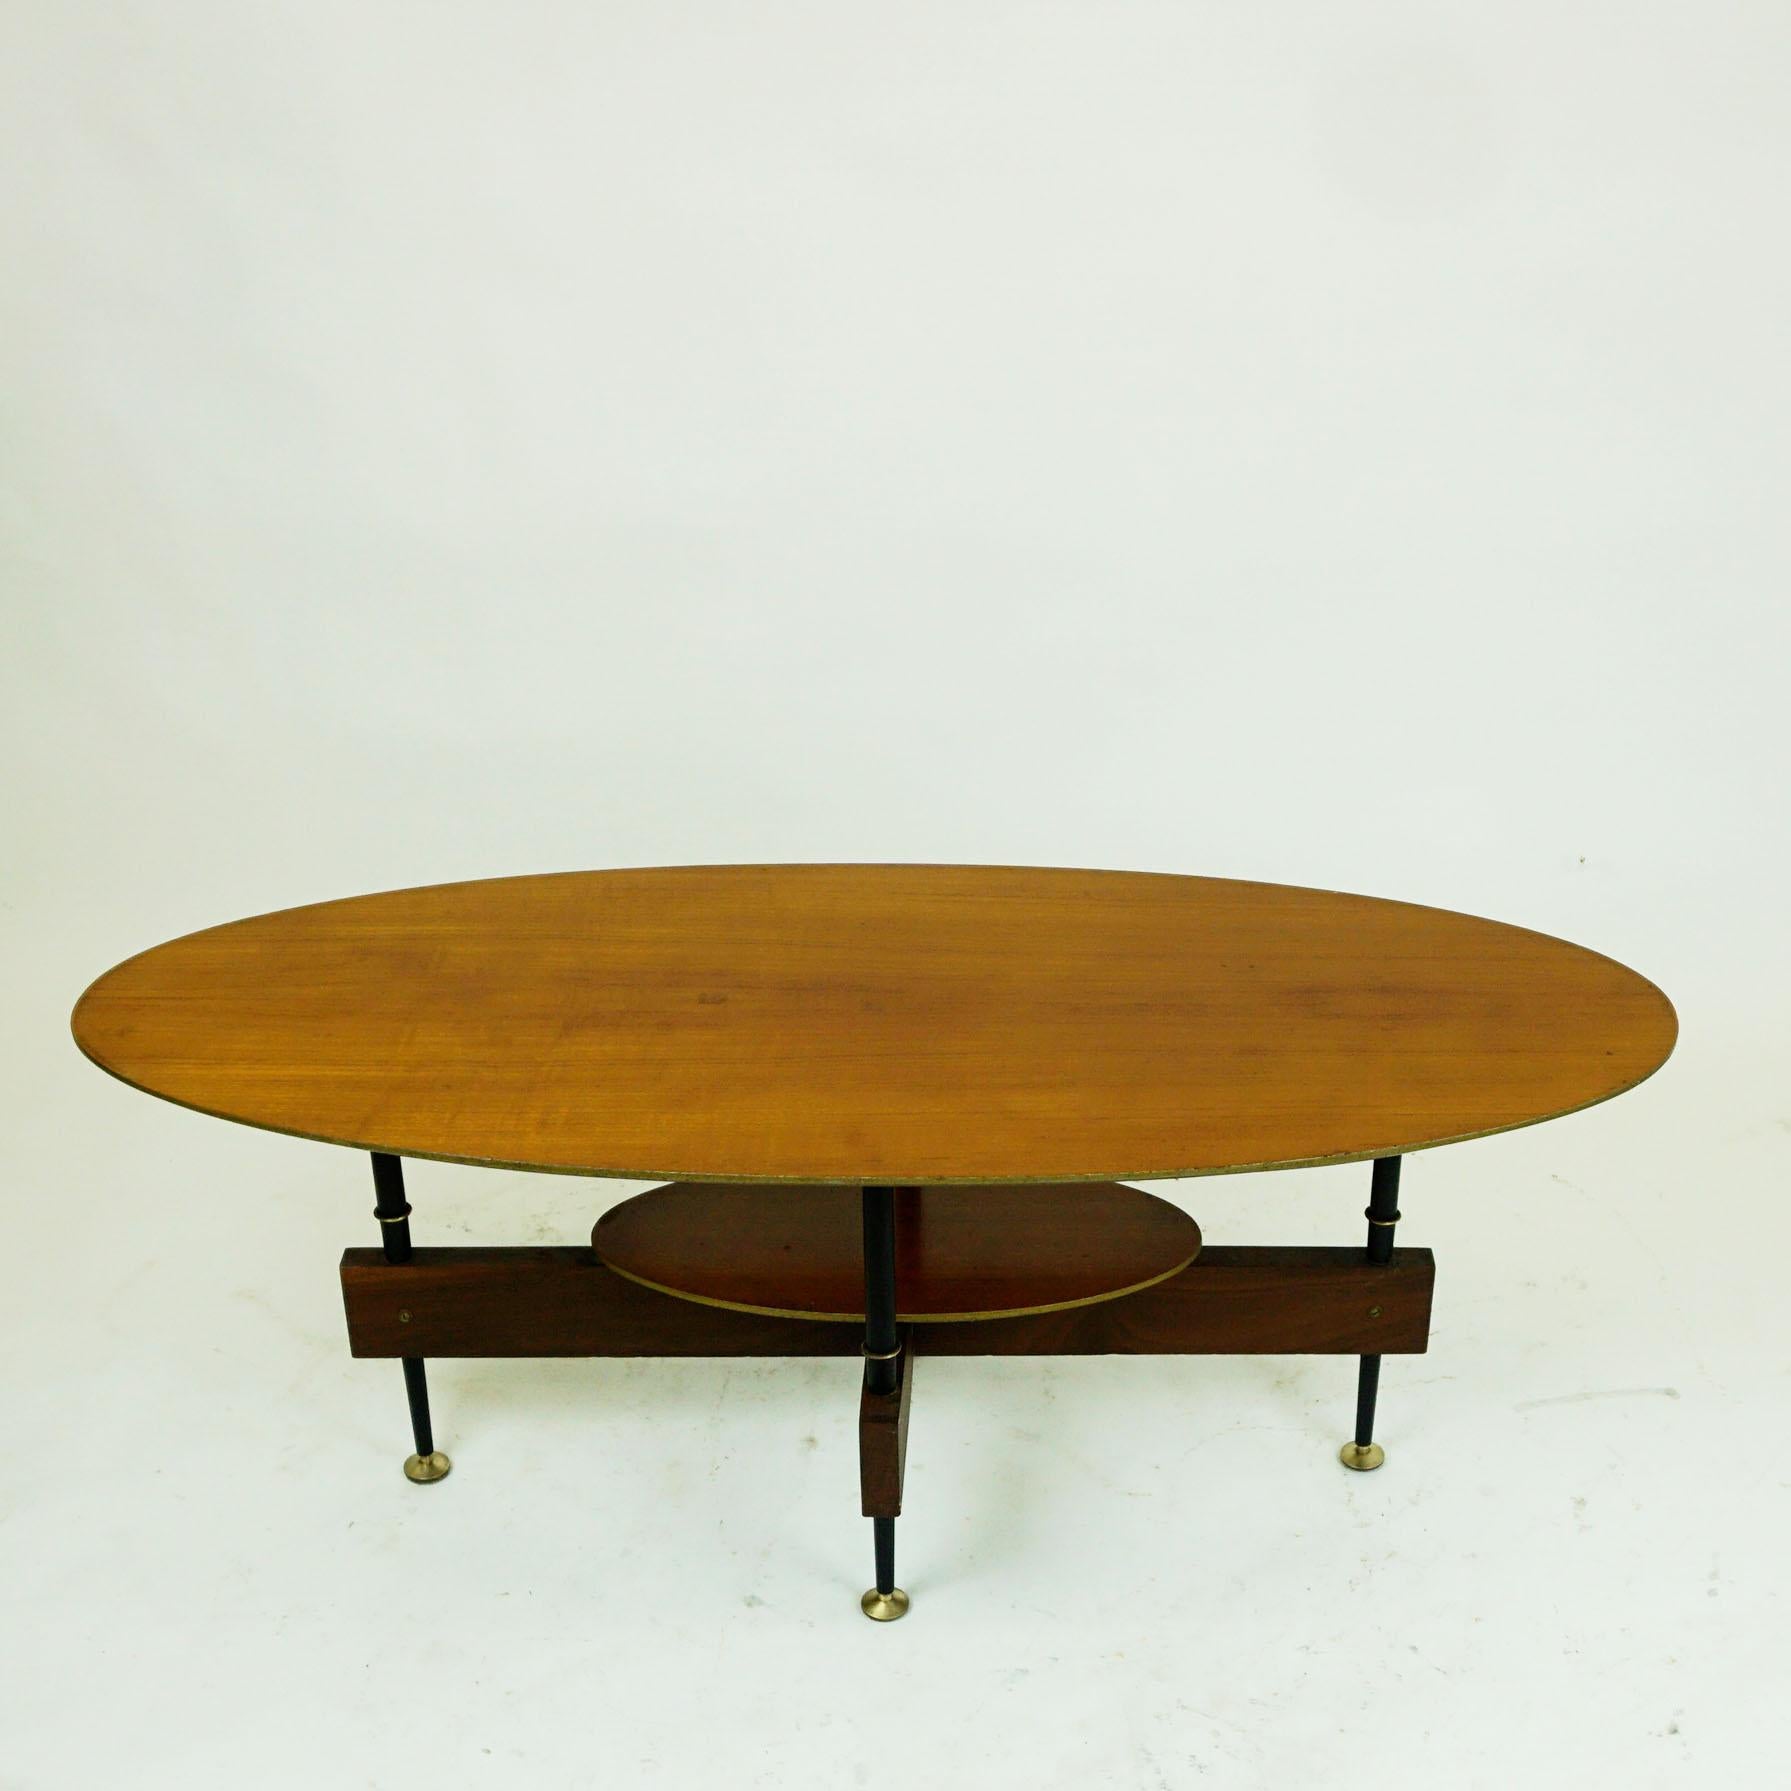 Small elegant Italian midcentury teak cocktail or coffee table designed in the 1950s. It features a oval teak wood top and black lacquered metal legs with brass details.
  